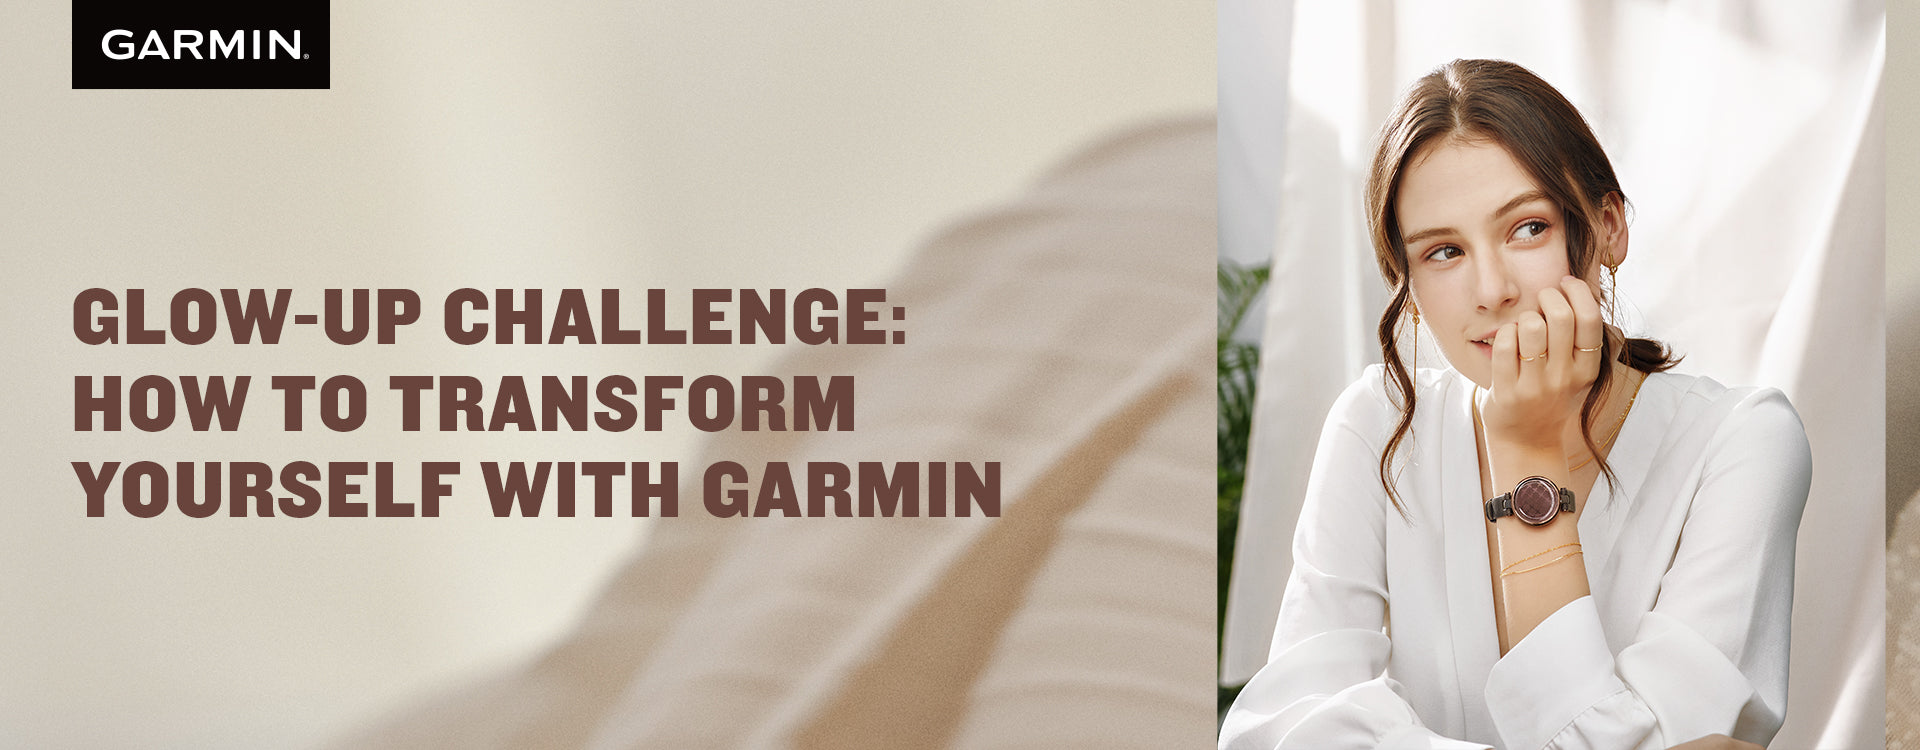 Glow-Up Challenge: How to Transform Yourself with Garmin